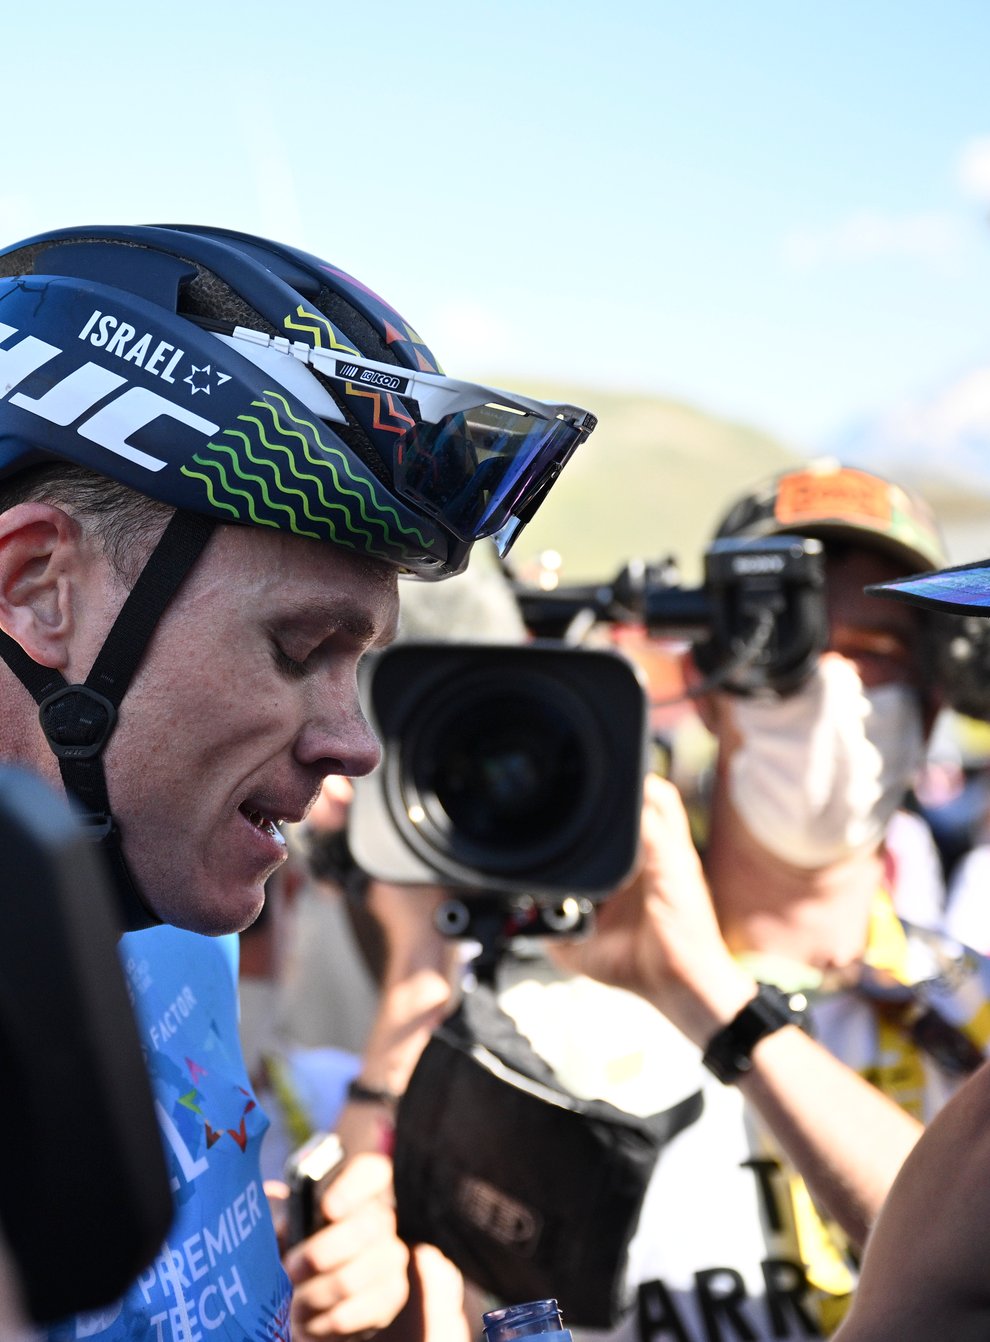 Chris Froome has been forced to leave the Tour de France after testing positive for Covid-19 (Marco Bertorello/AP)